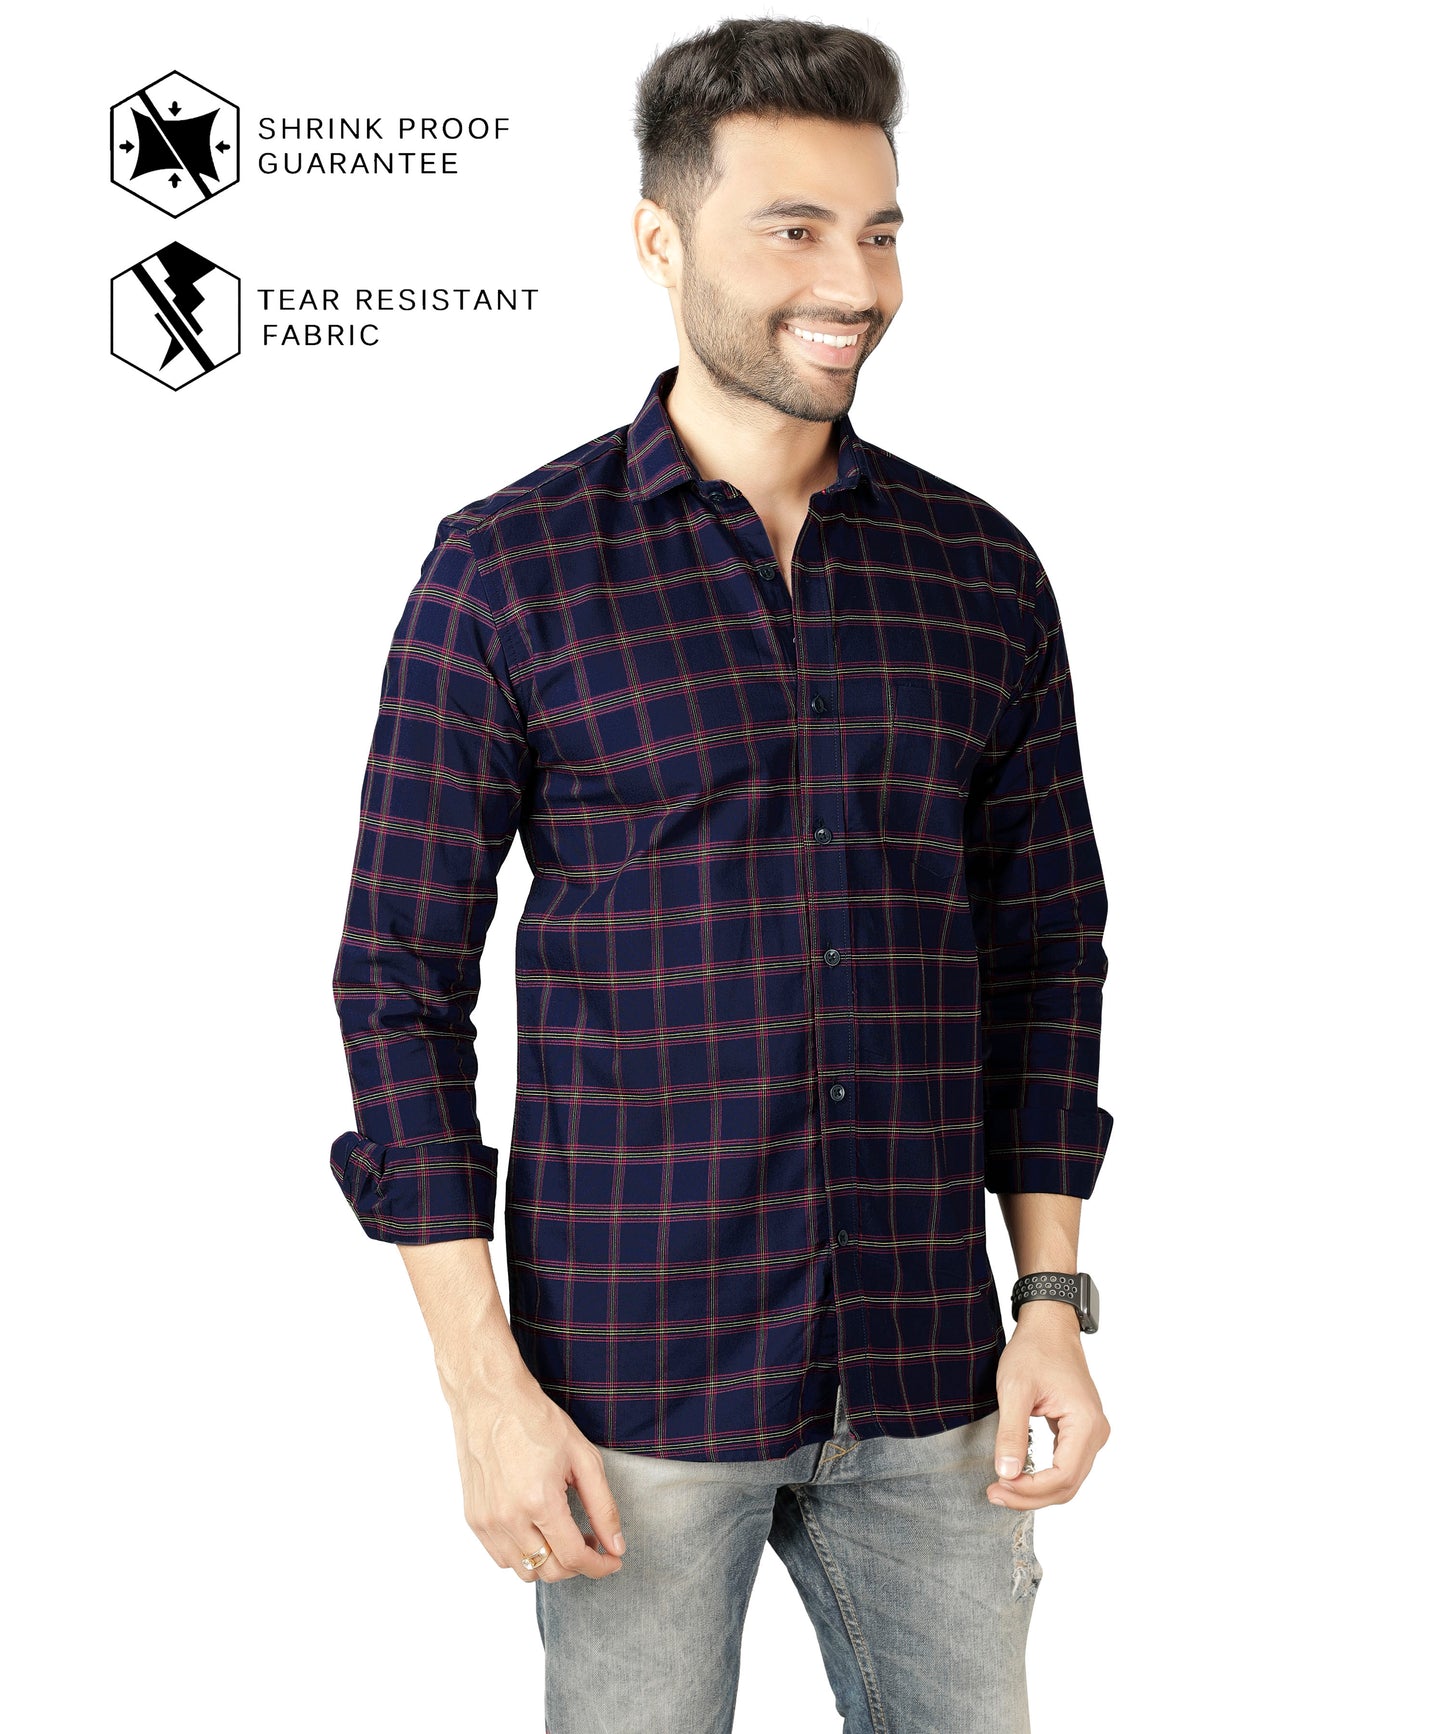 5thanfold Men's Casual Pure Cotton Full Sleeve Checkered Dark blue Slim Fit Shirt